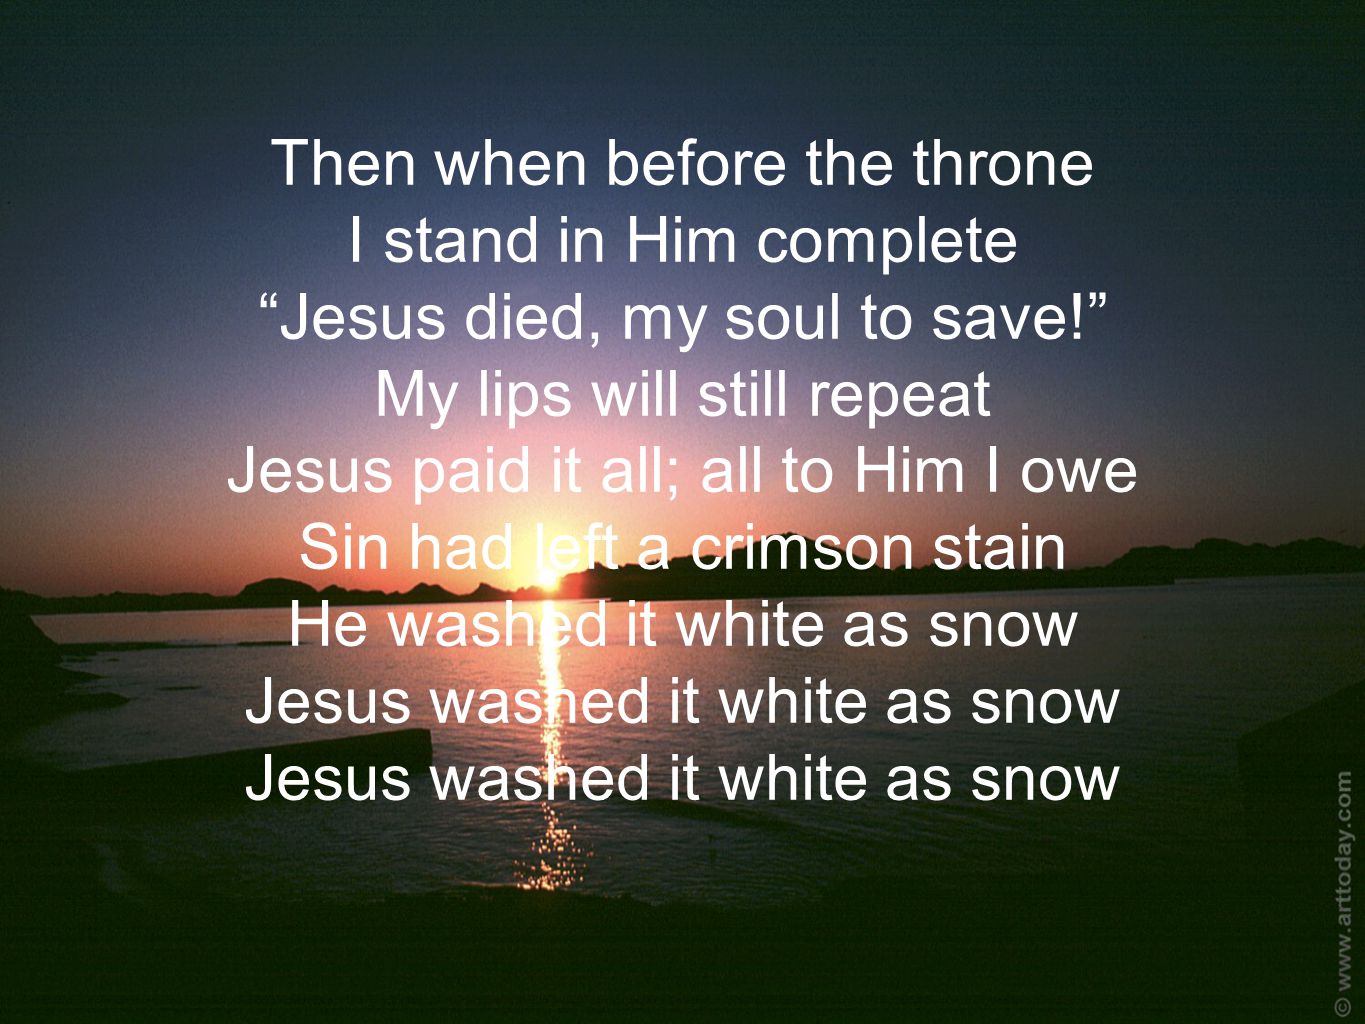 Then when before the throne I stand in Him complete Jesus died, my soul to save! My lips will still repeat Jesus paid it all; all to Him I owe Sin had left a crimson stain He washed it white as snow Jesus washed it white as snow Jesus washed it white as snow